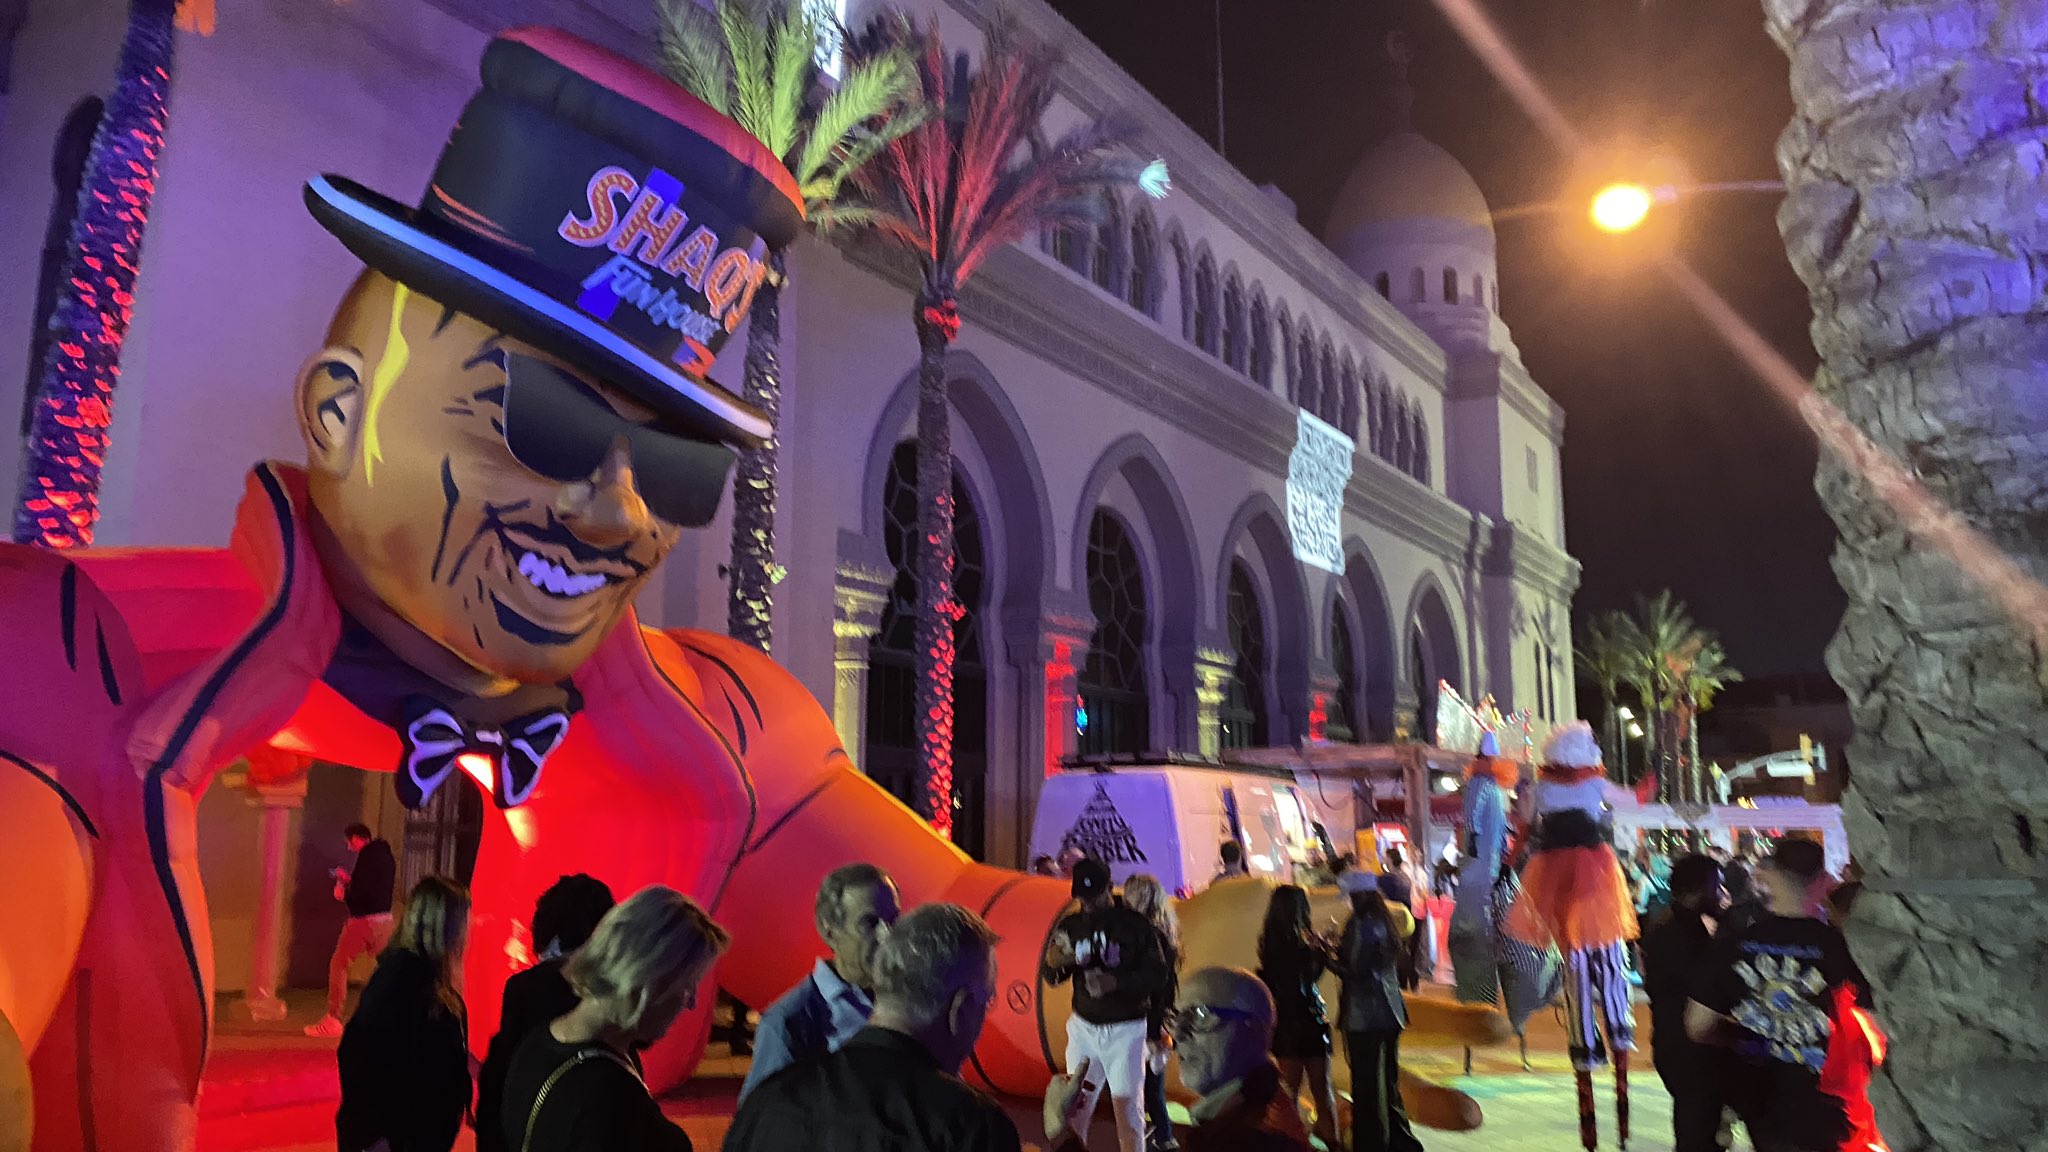 Super Bowl: Shaq’s Fun House Draws Large Crowd, Celebrities With Live Music, Entertainment